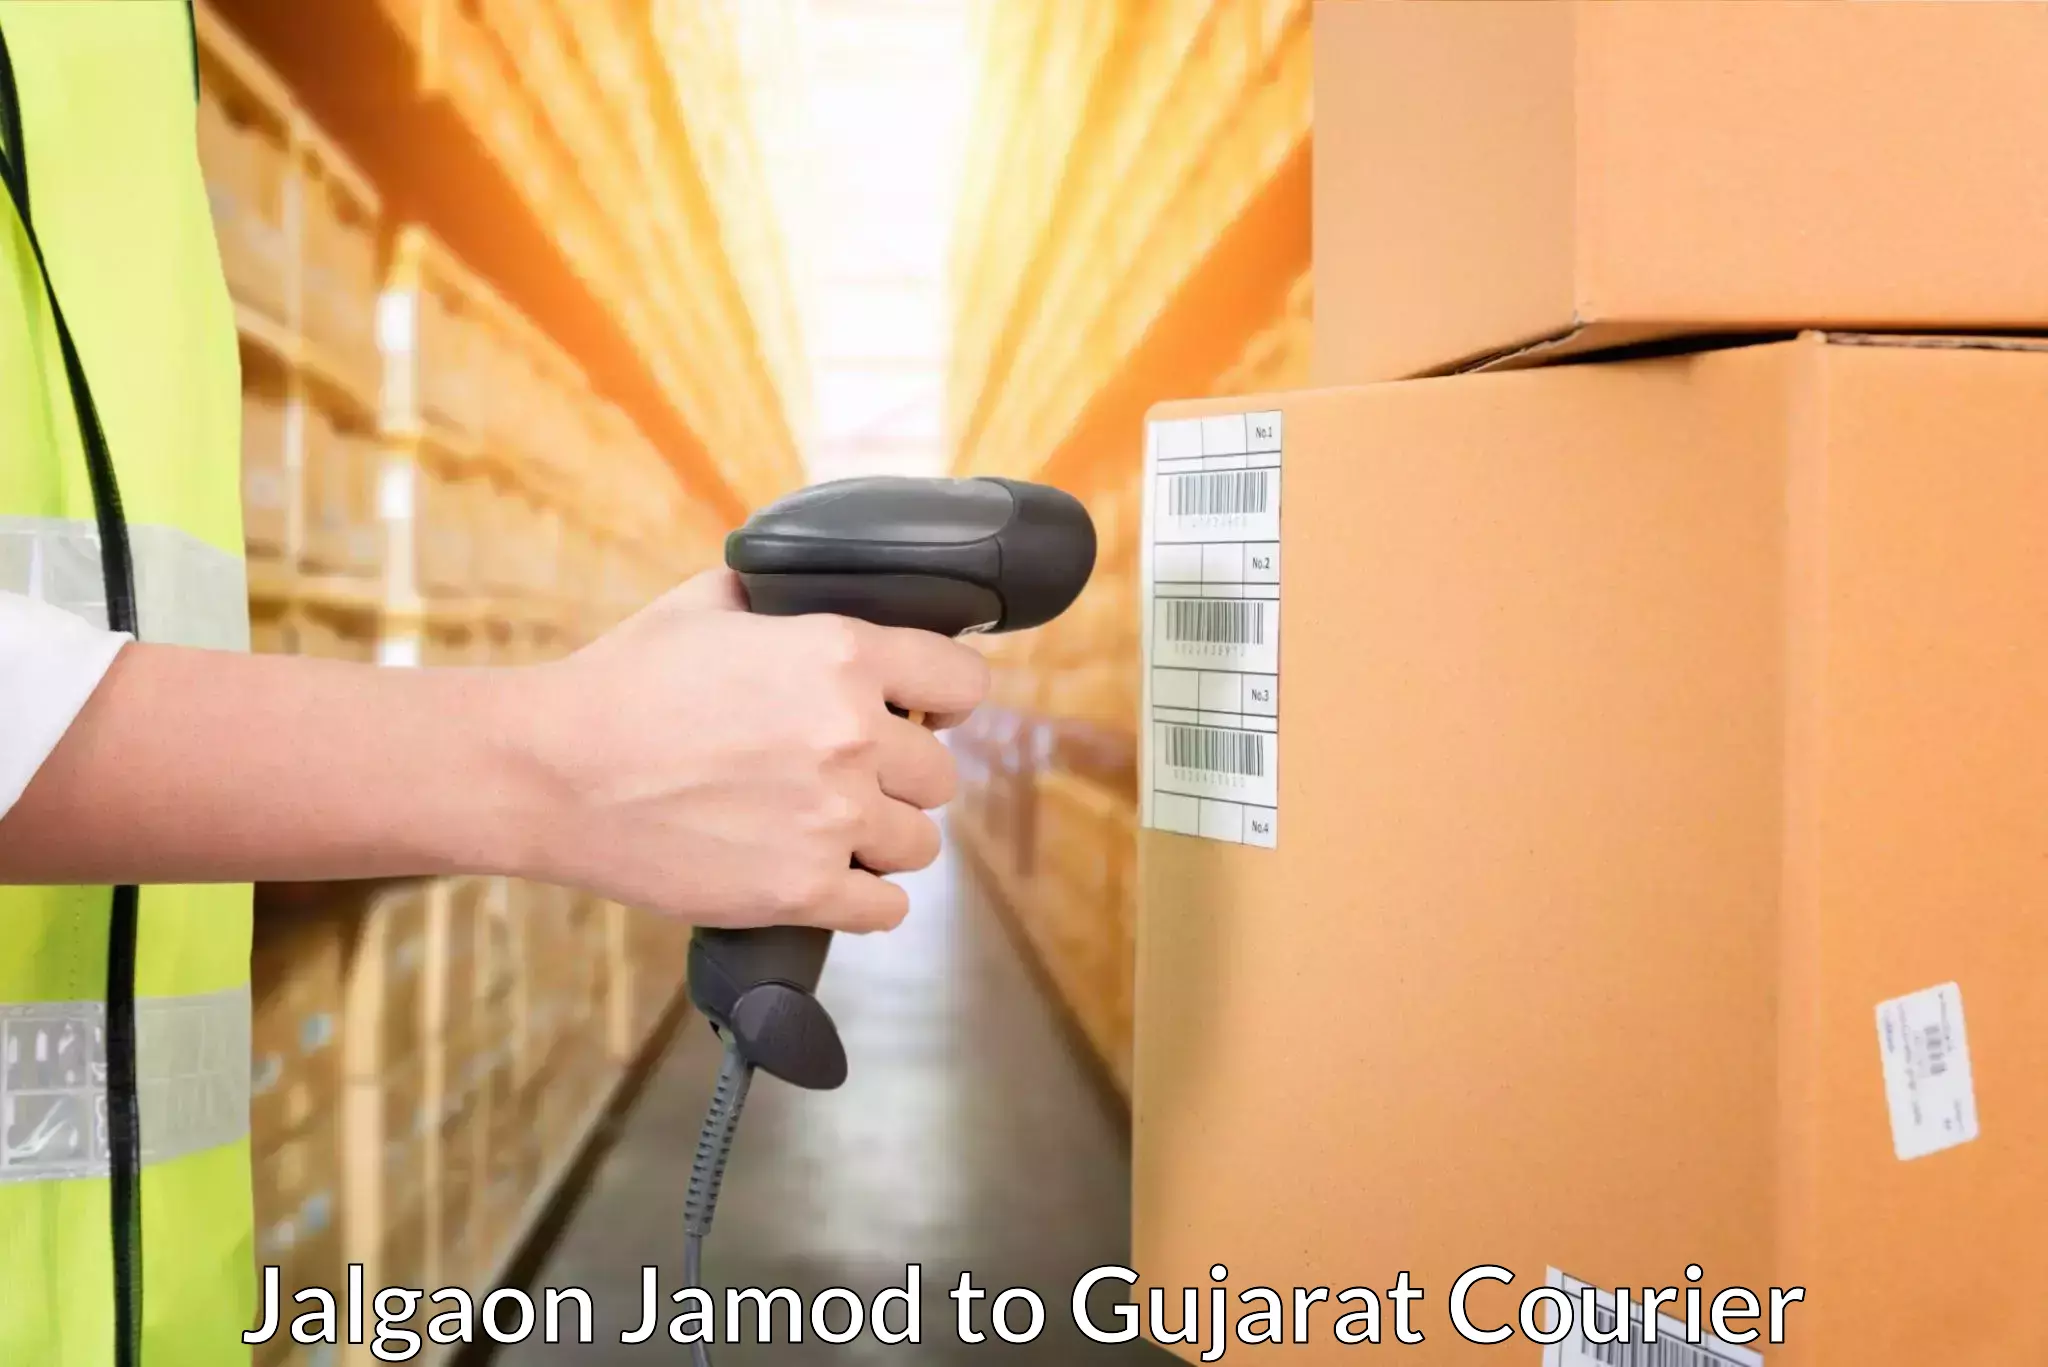 24-hour courier services in Jalgaon Jamod to GIDC